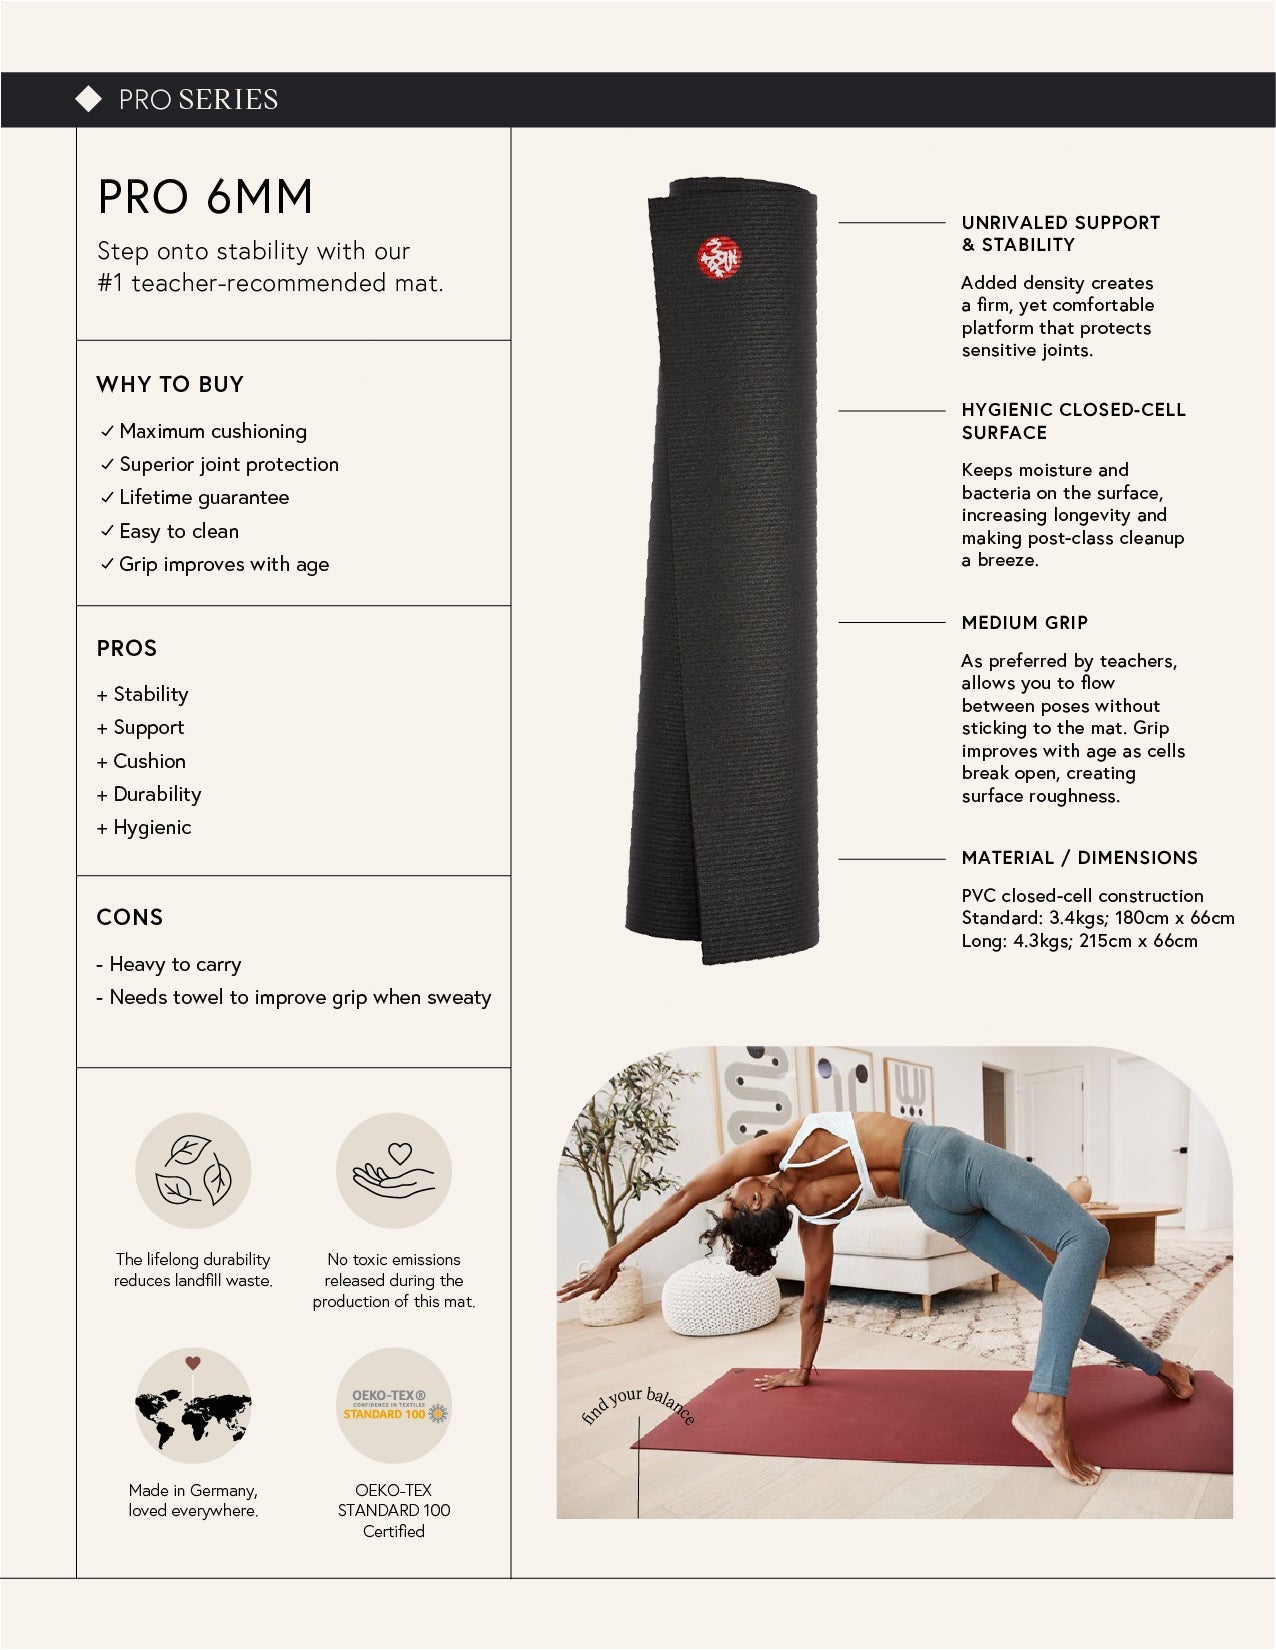 Awesome Yoga Gifts for the Fitness-Minded Men - Man Flow Yoga